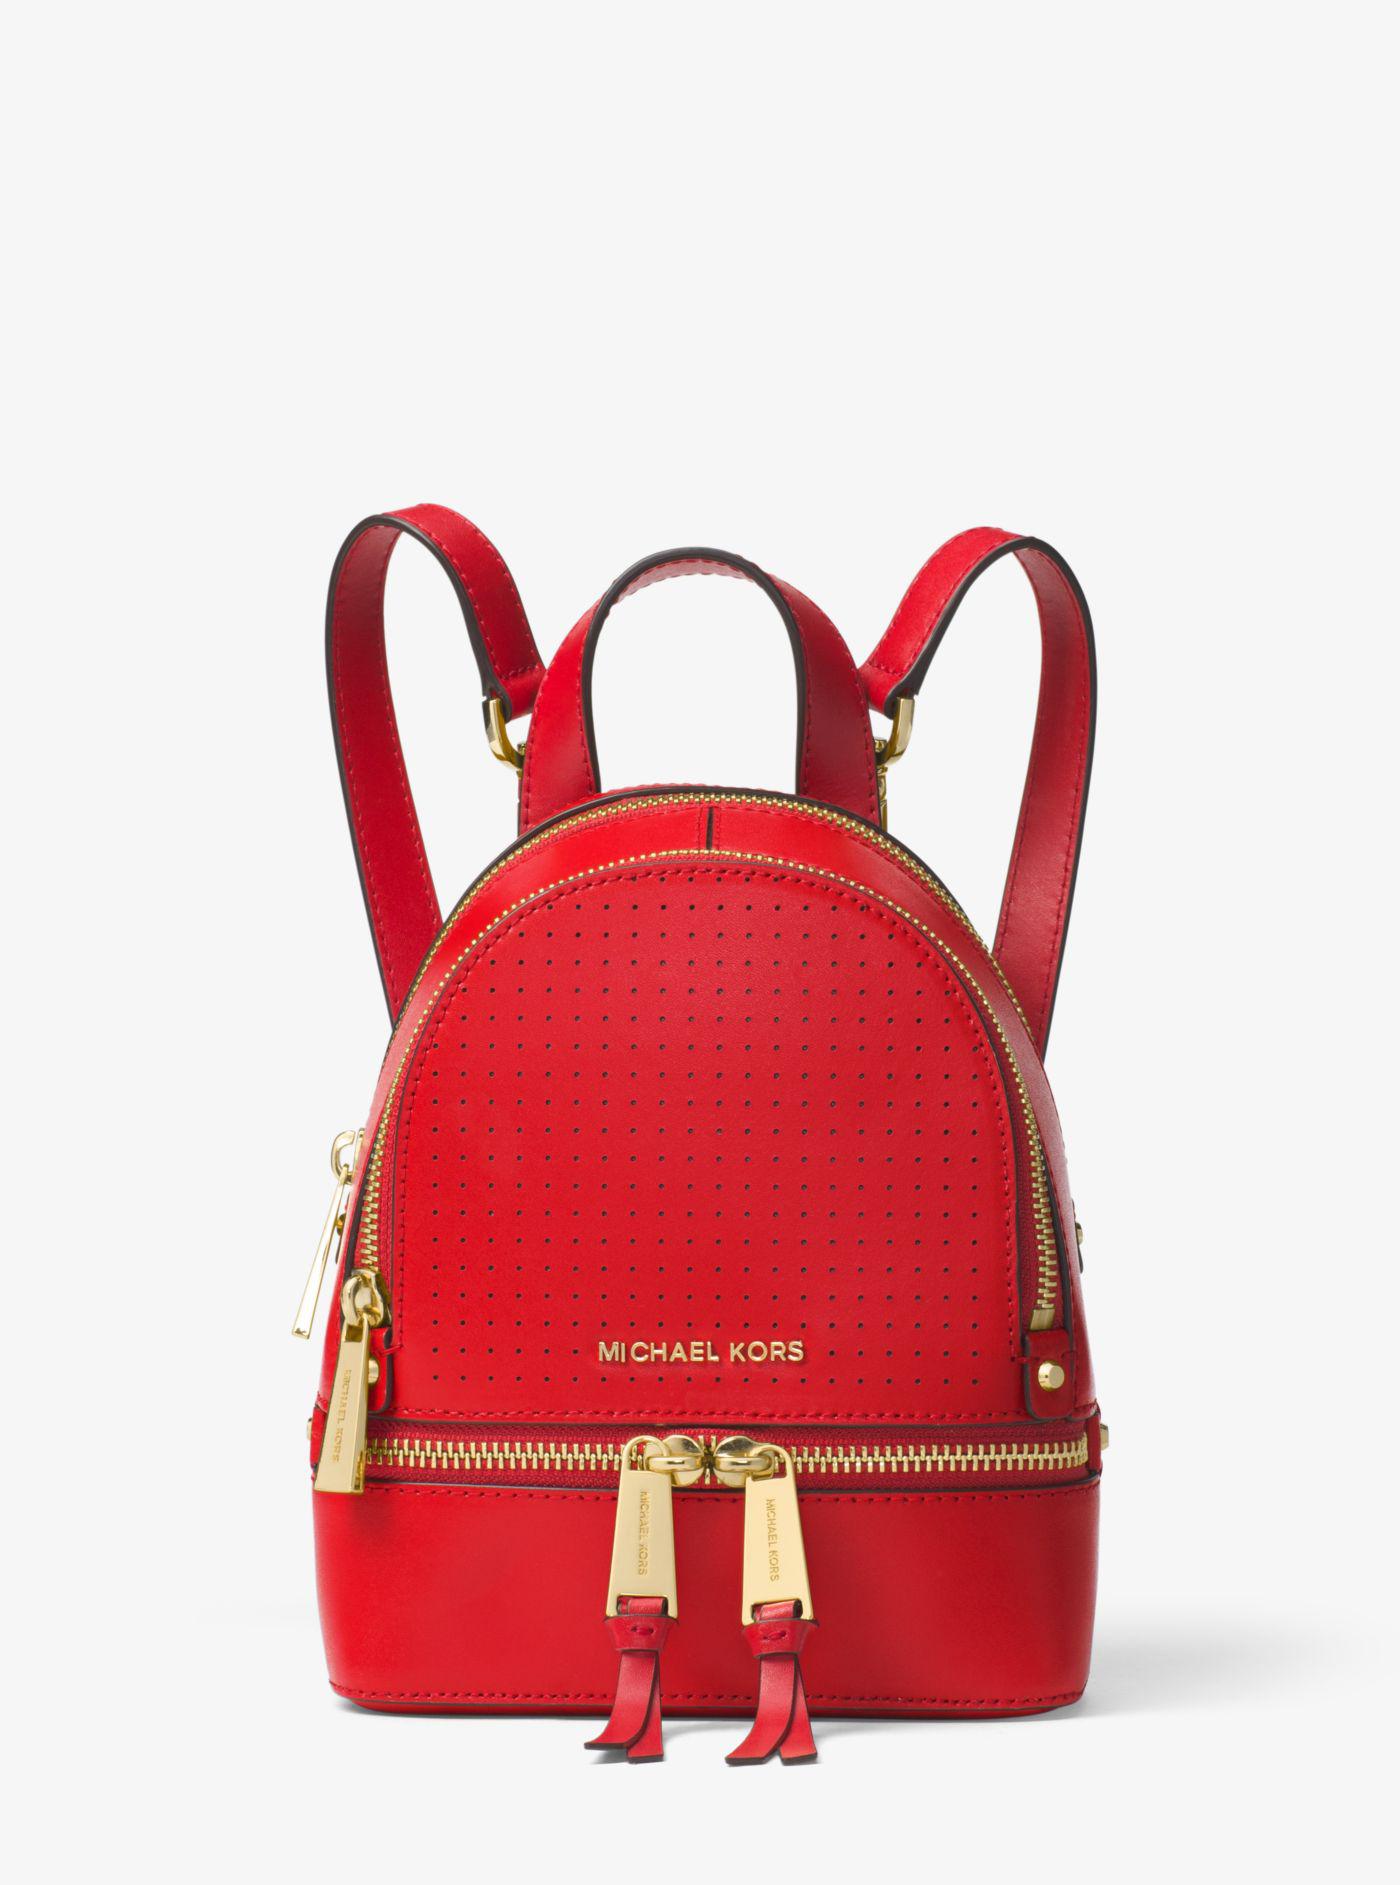 Michael Kors Rhea Large Leather Backpack in Bright Red (Red) - Lyst